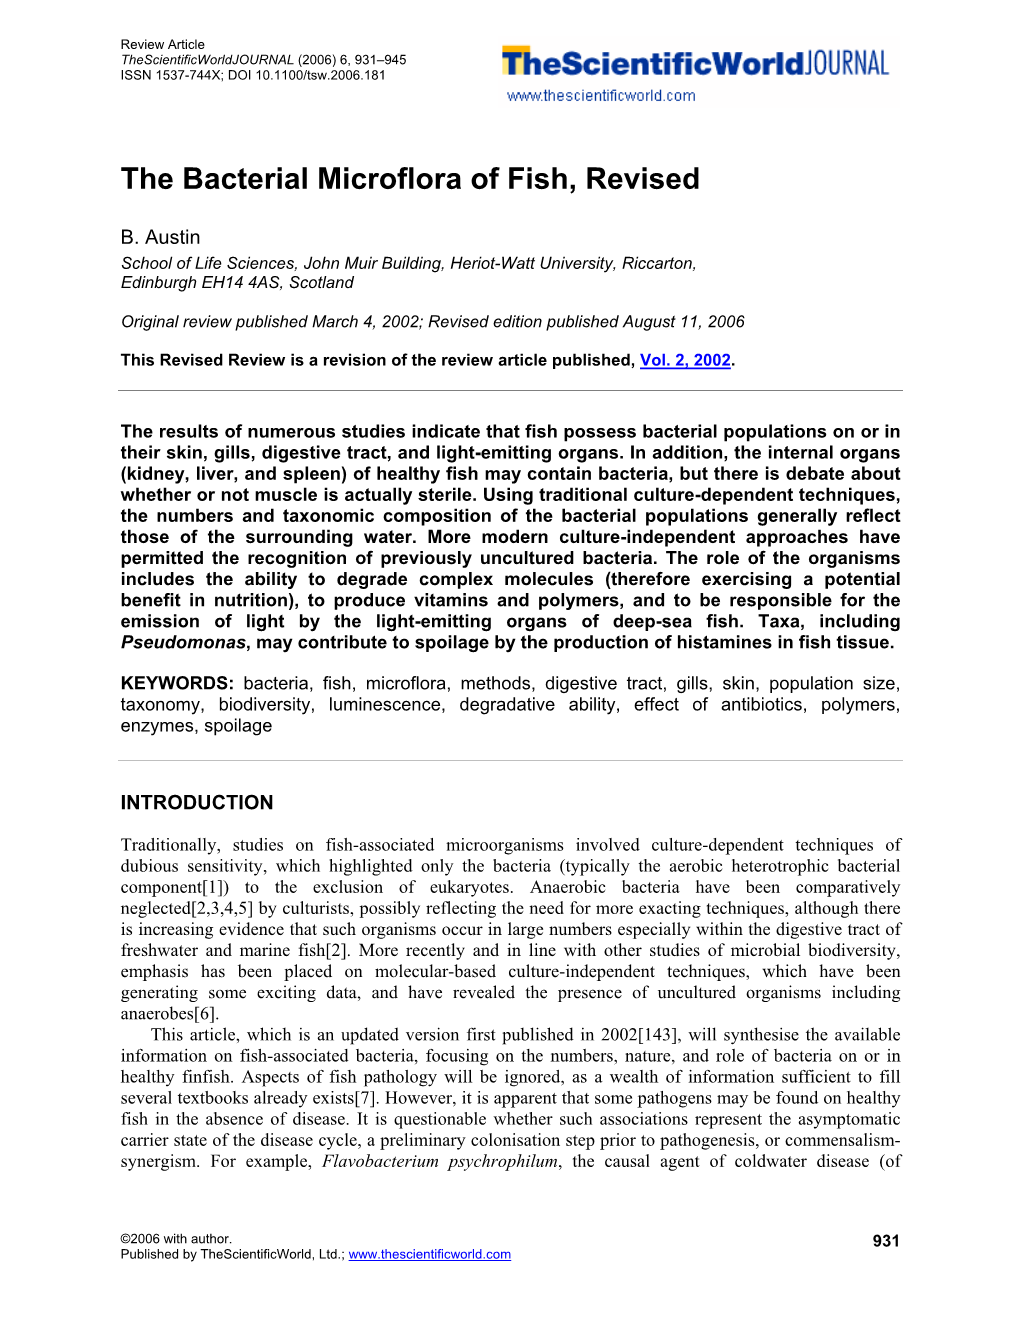 The Bacterial Microflora of Fish, Revised